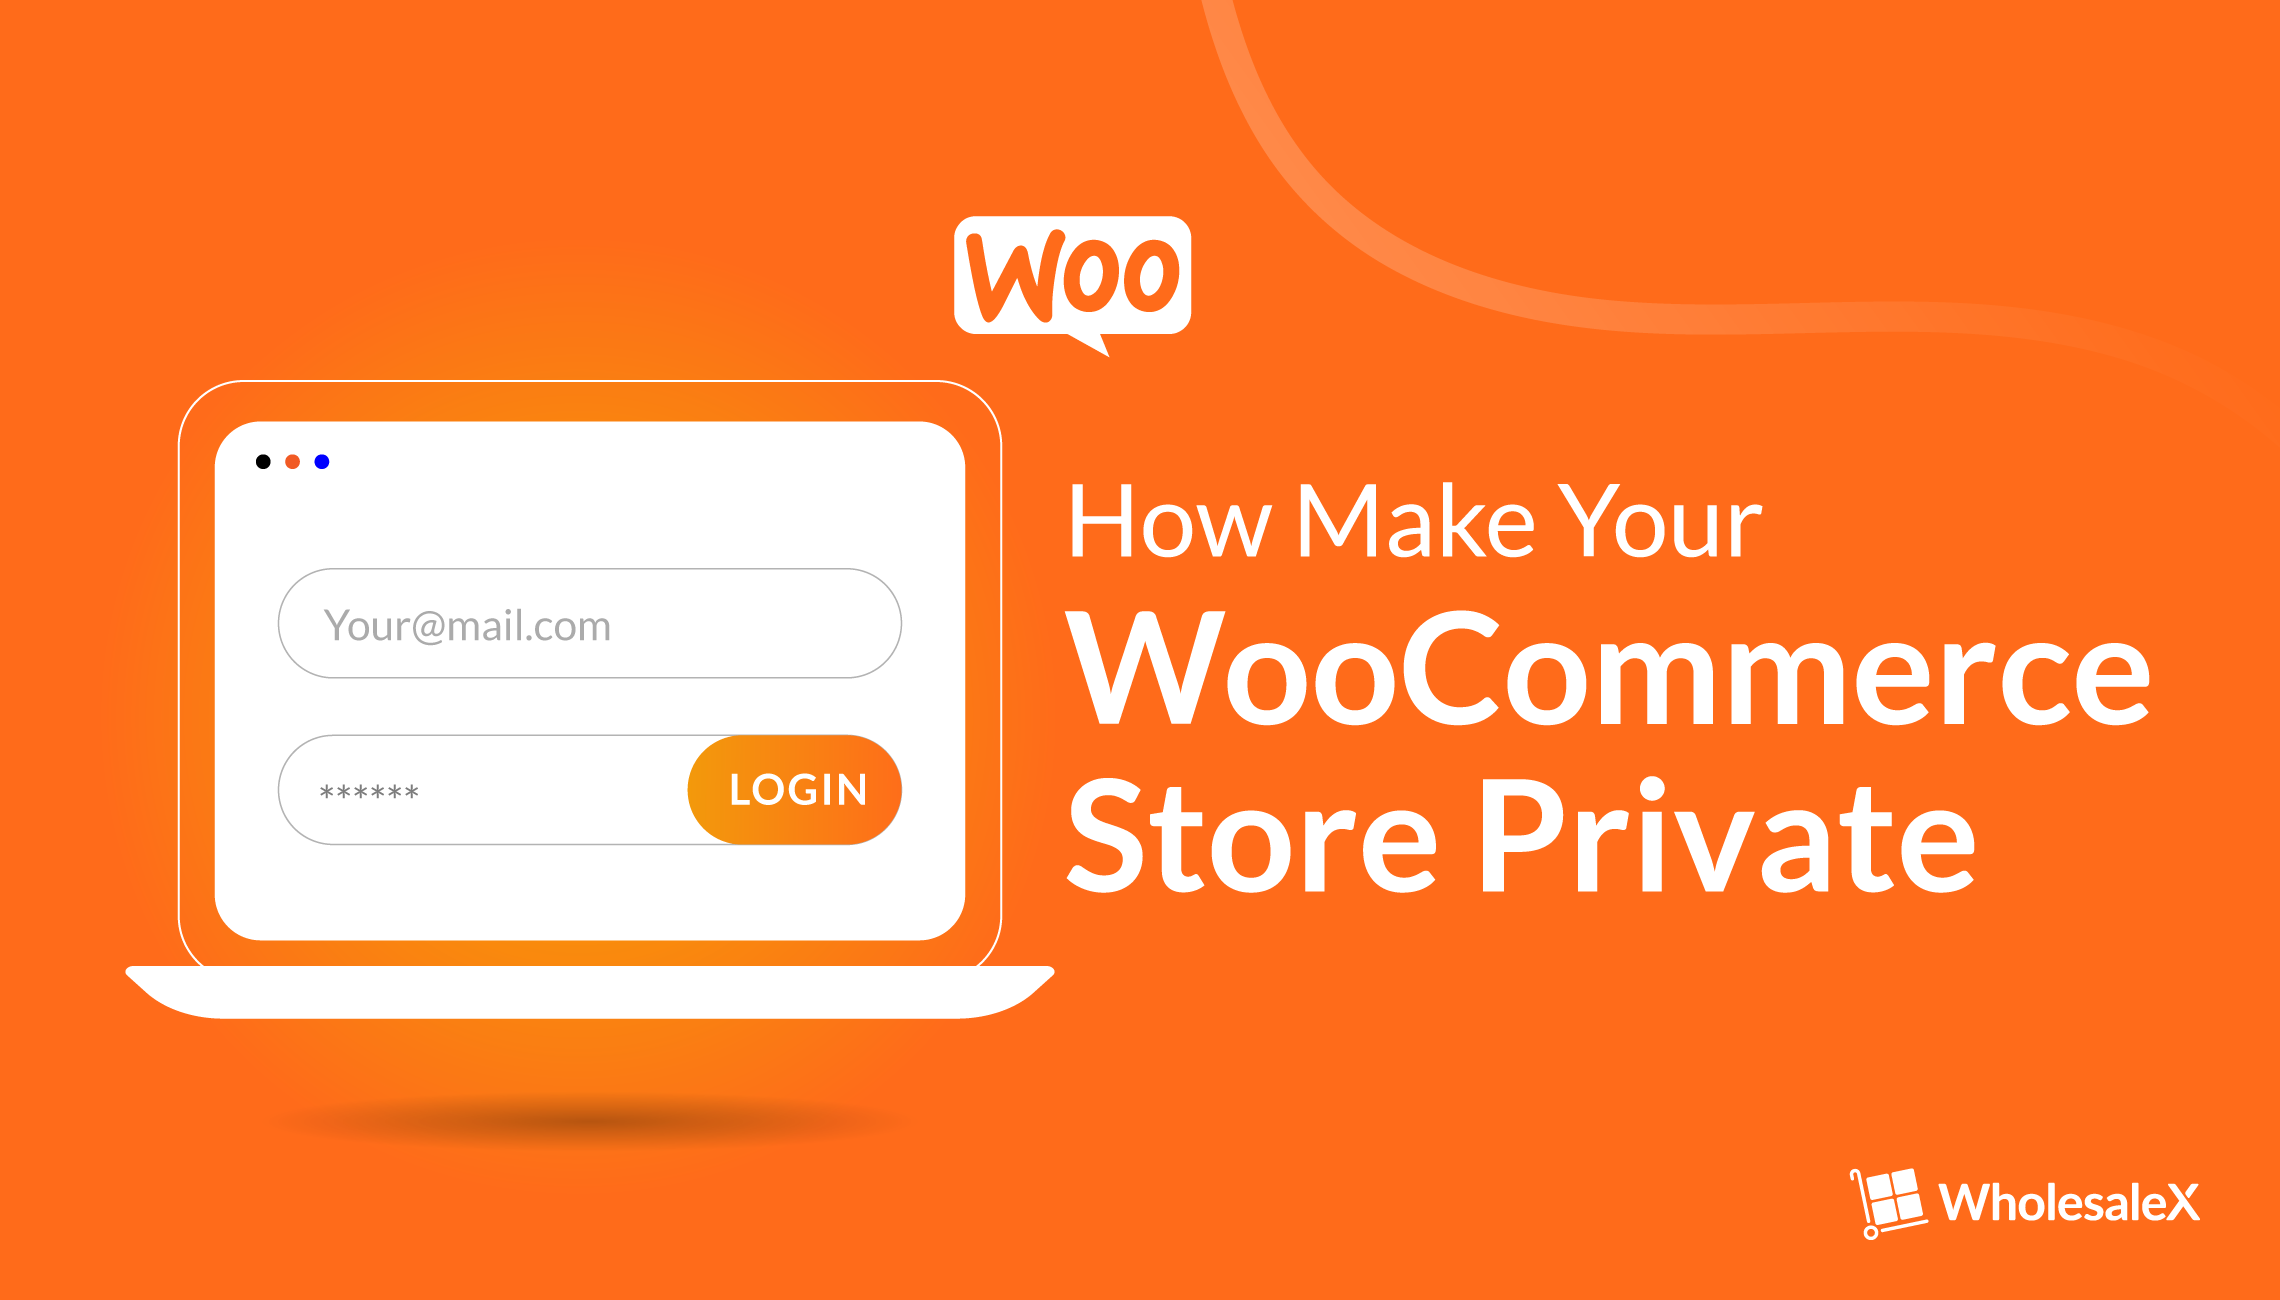 Make your WooCommerce Store Private and Control Product Visibility